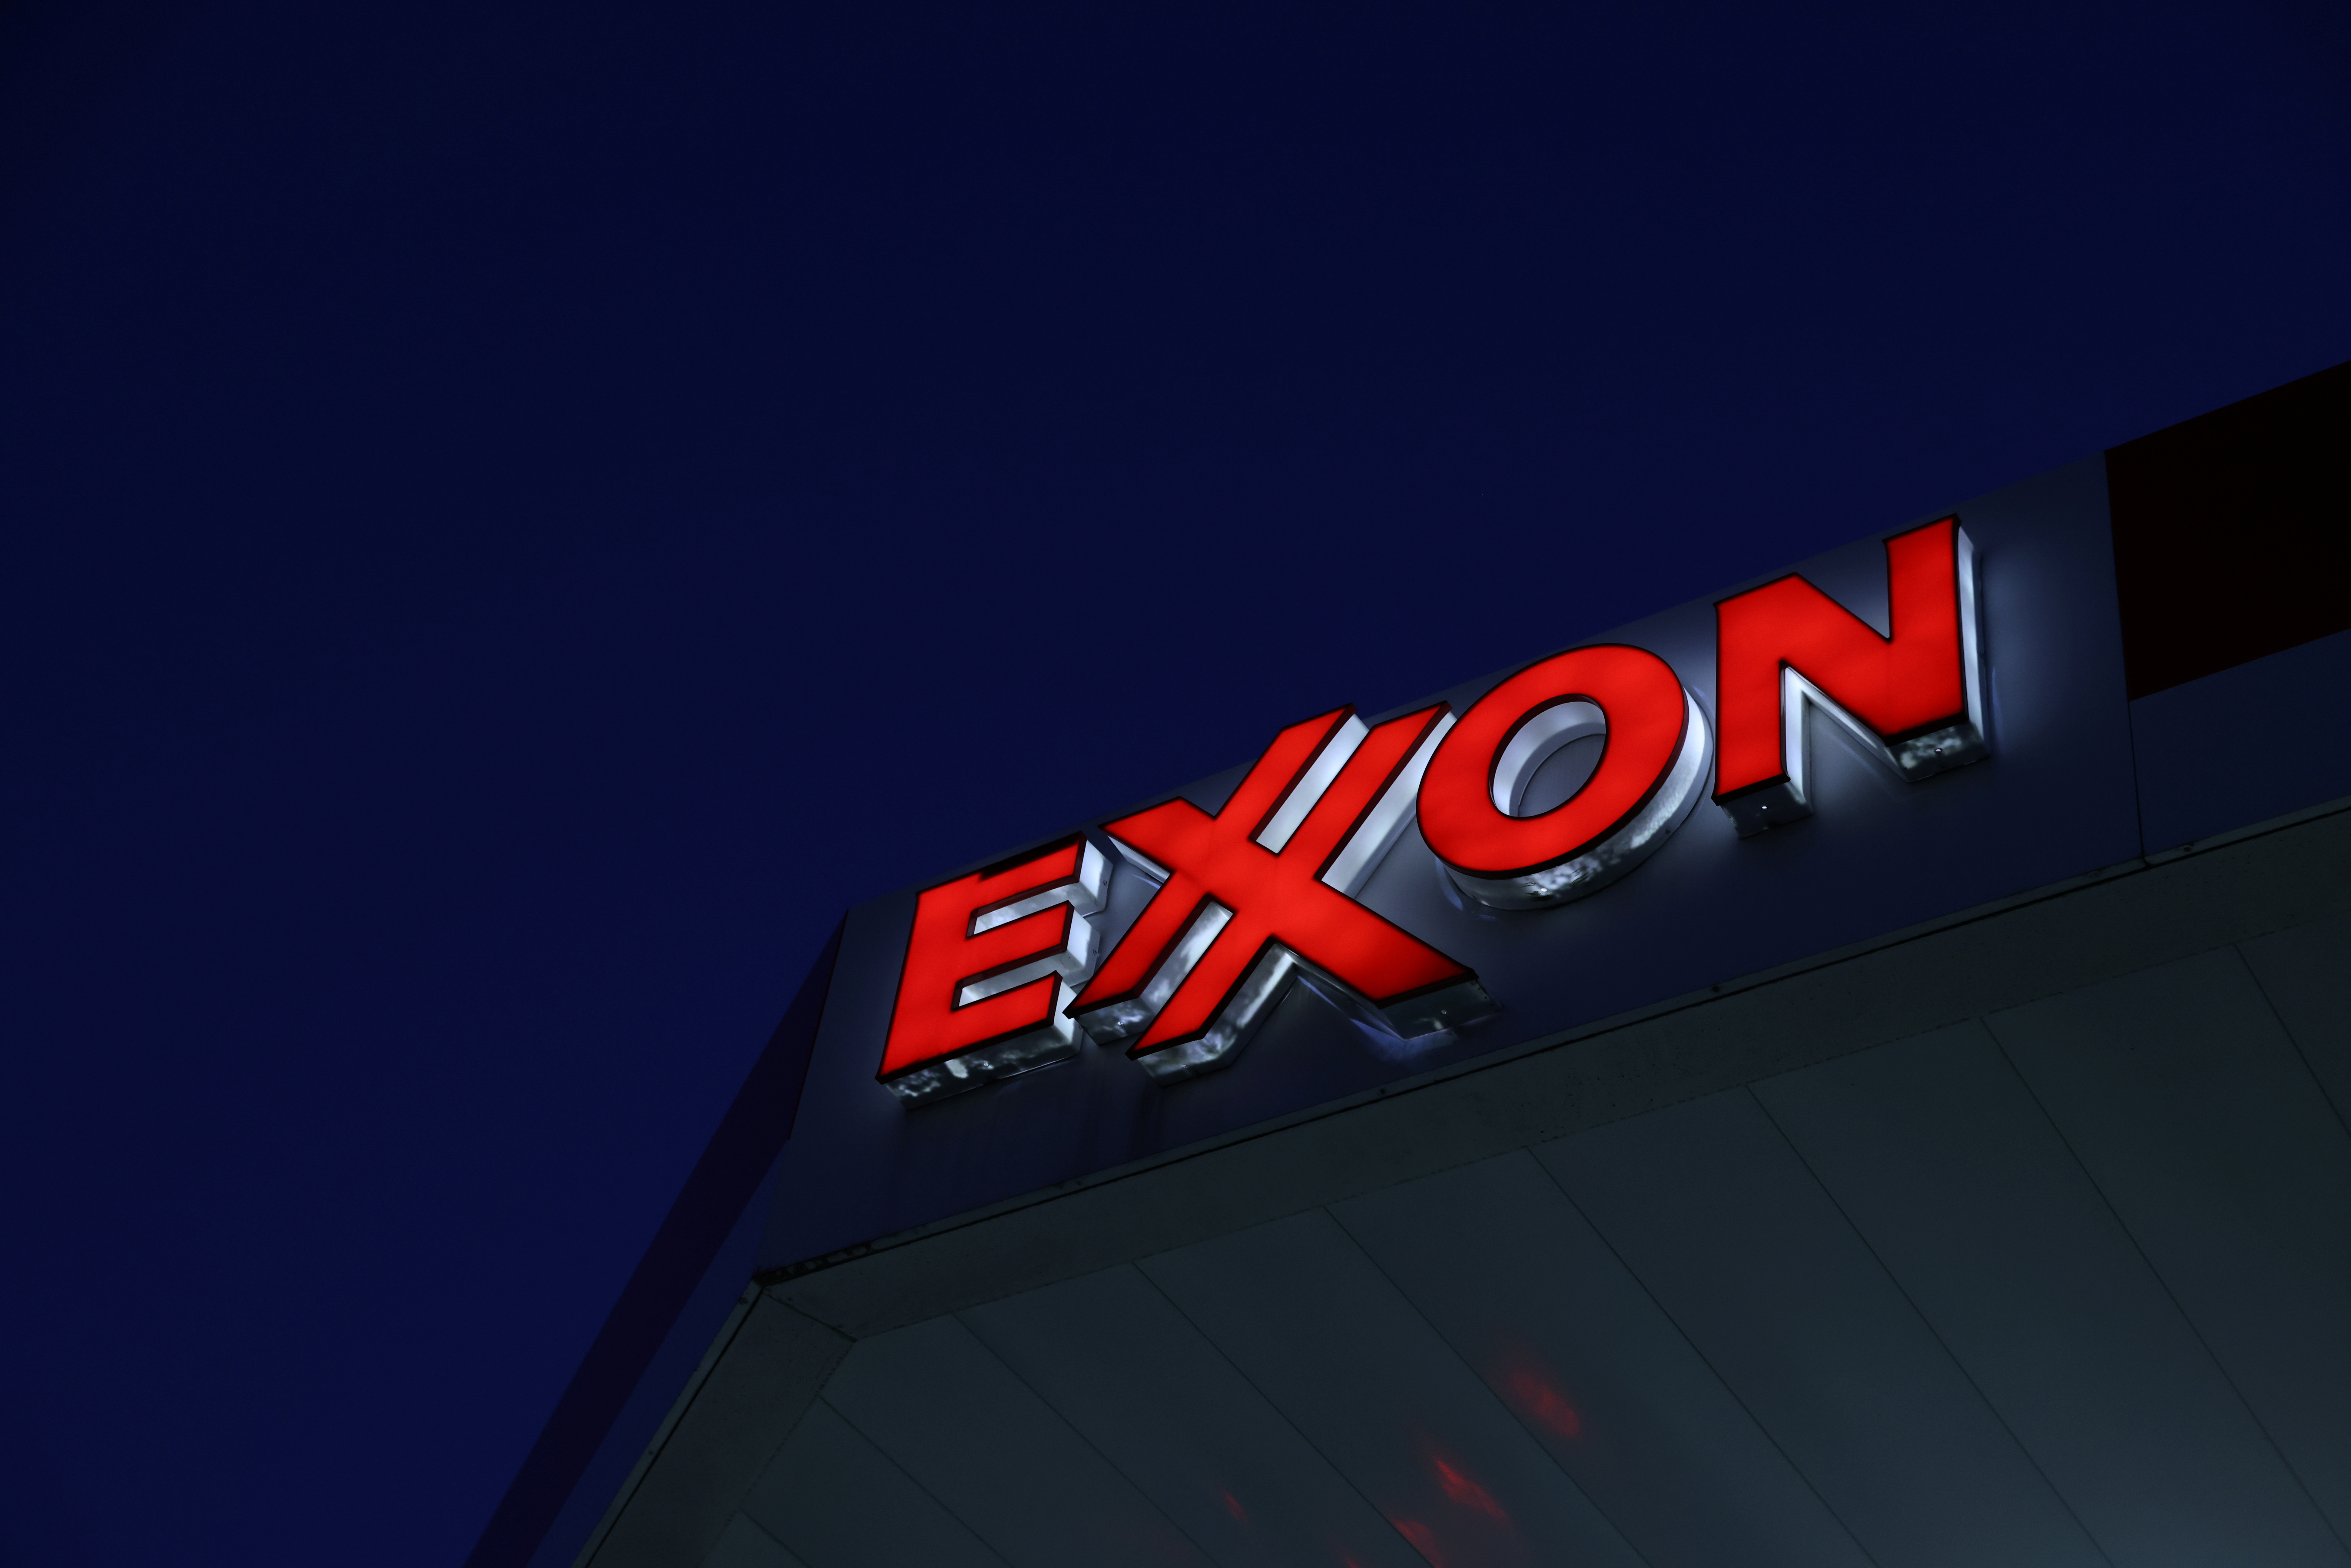 Signage is seen at an Exxon gas station in Brooklyn, New York City